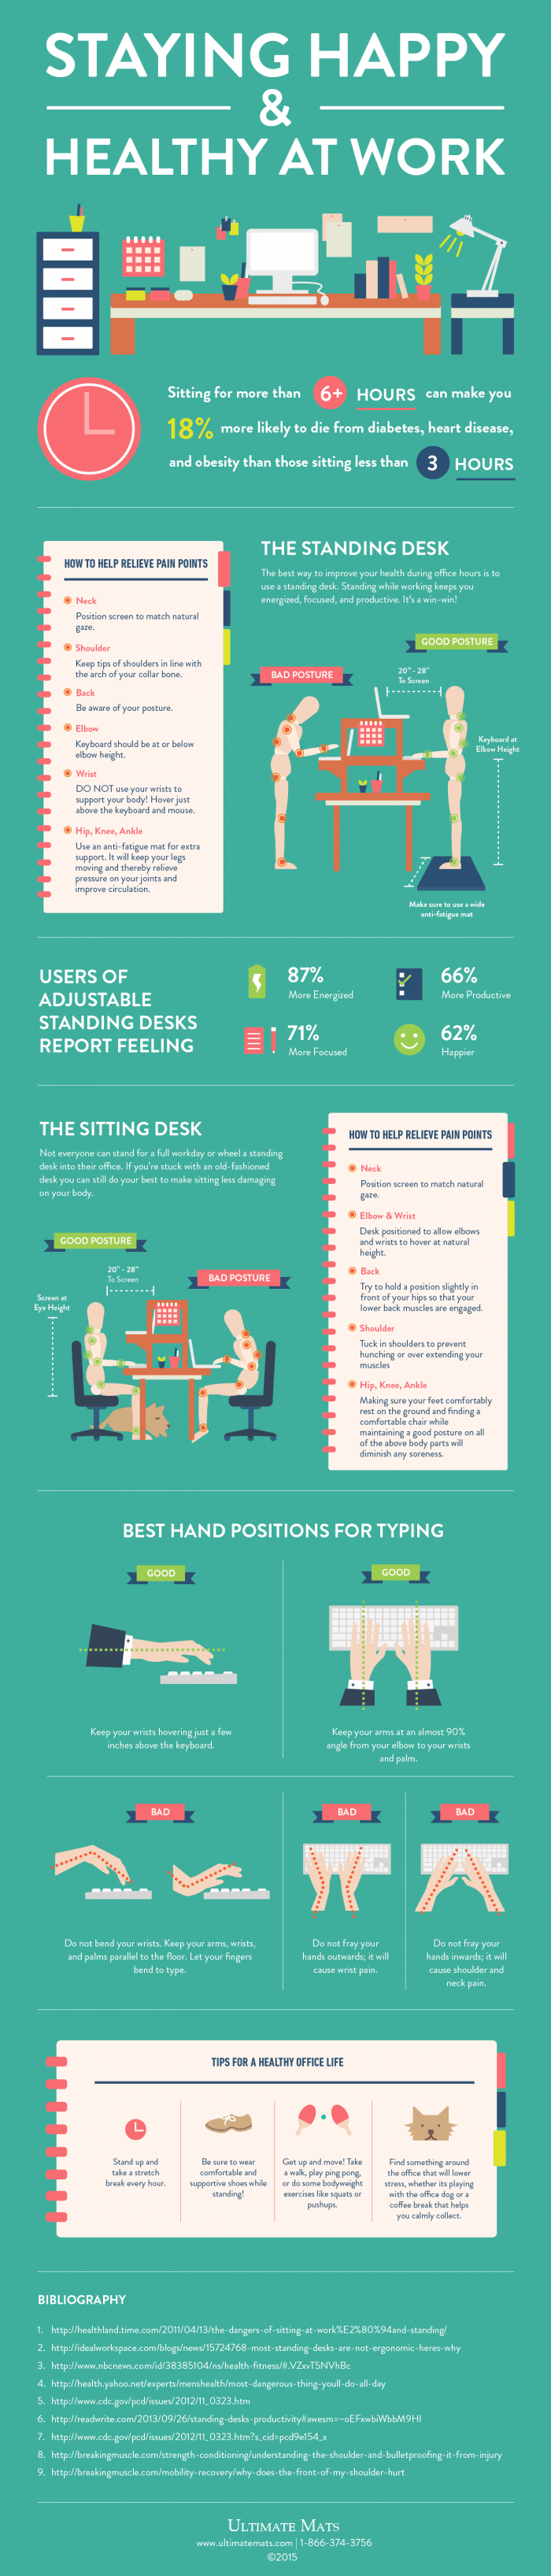 Tips on staying happy and health at work.